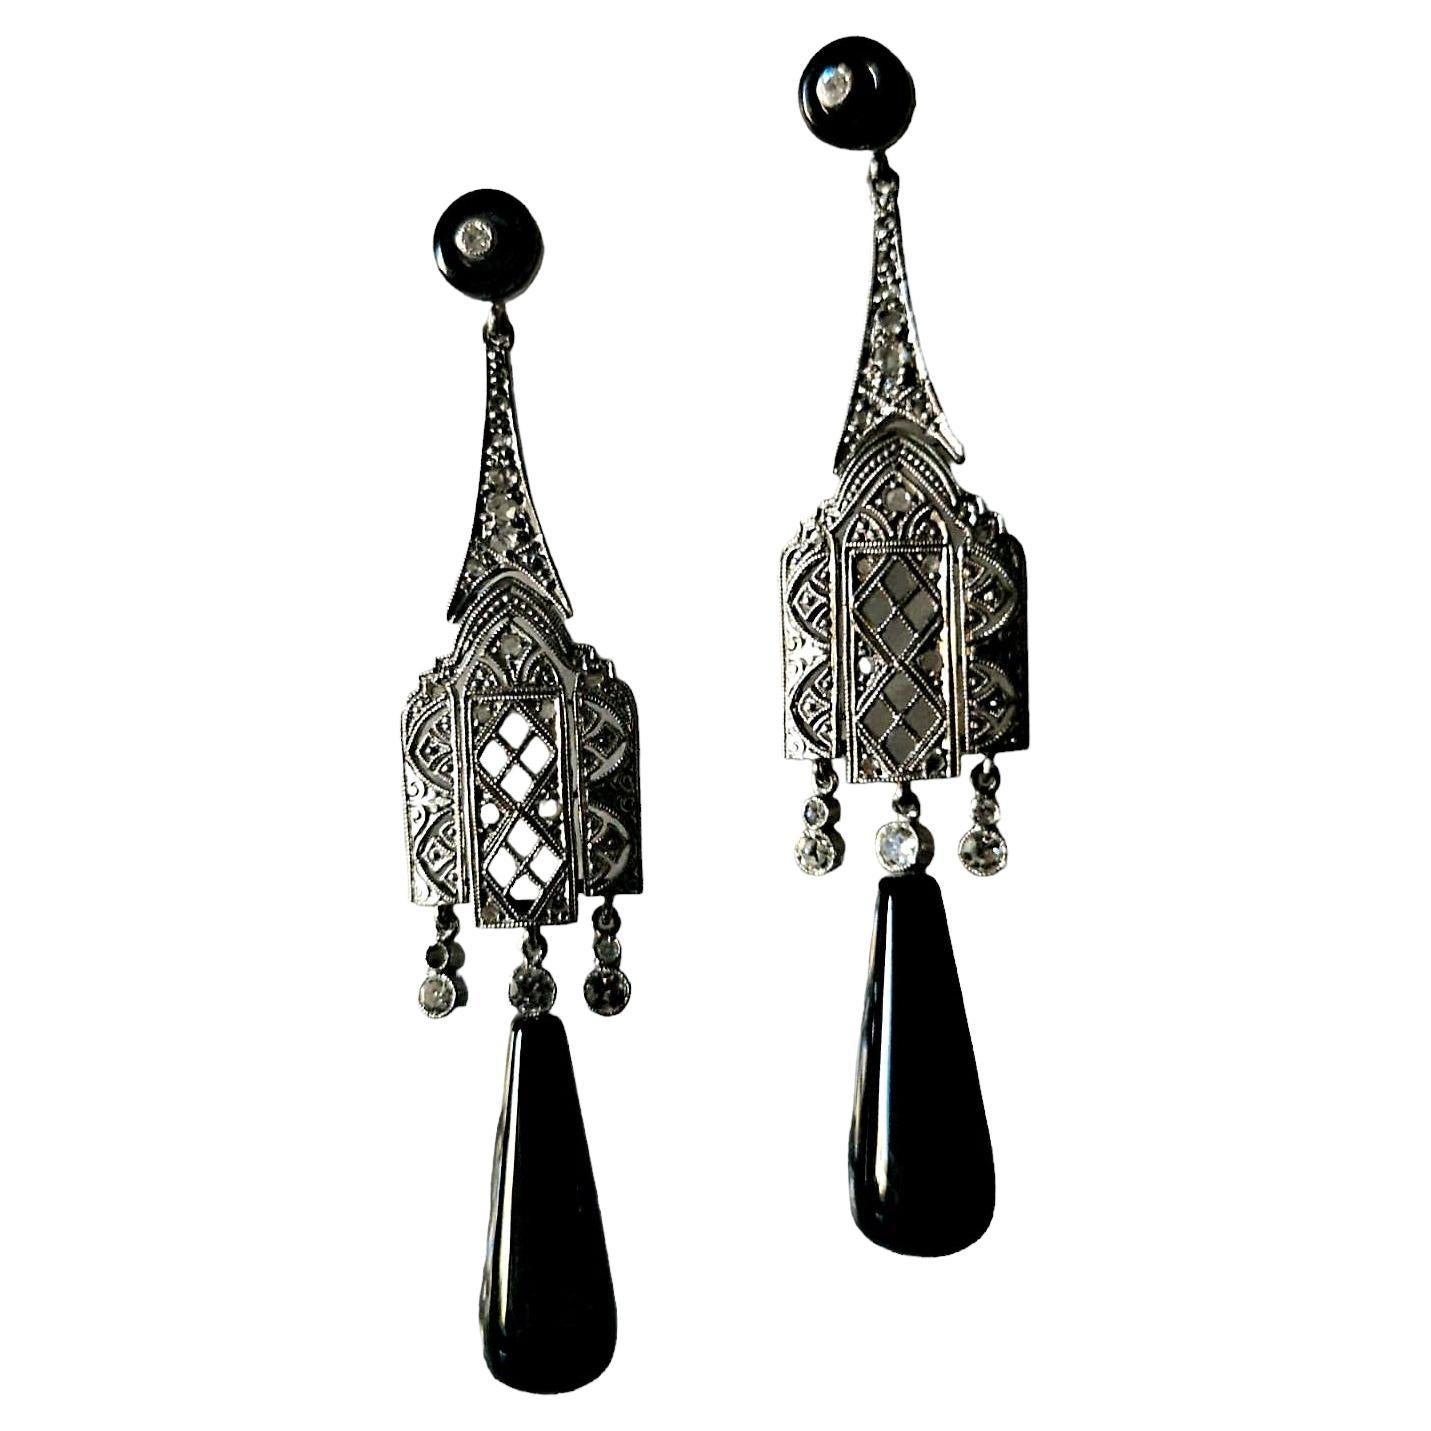 A Pair of Onyx and Diamond Earrings. Art-Deco Style. Mounted in Platinum. For Sale